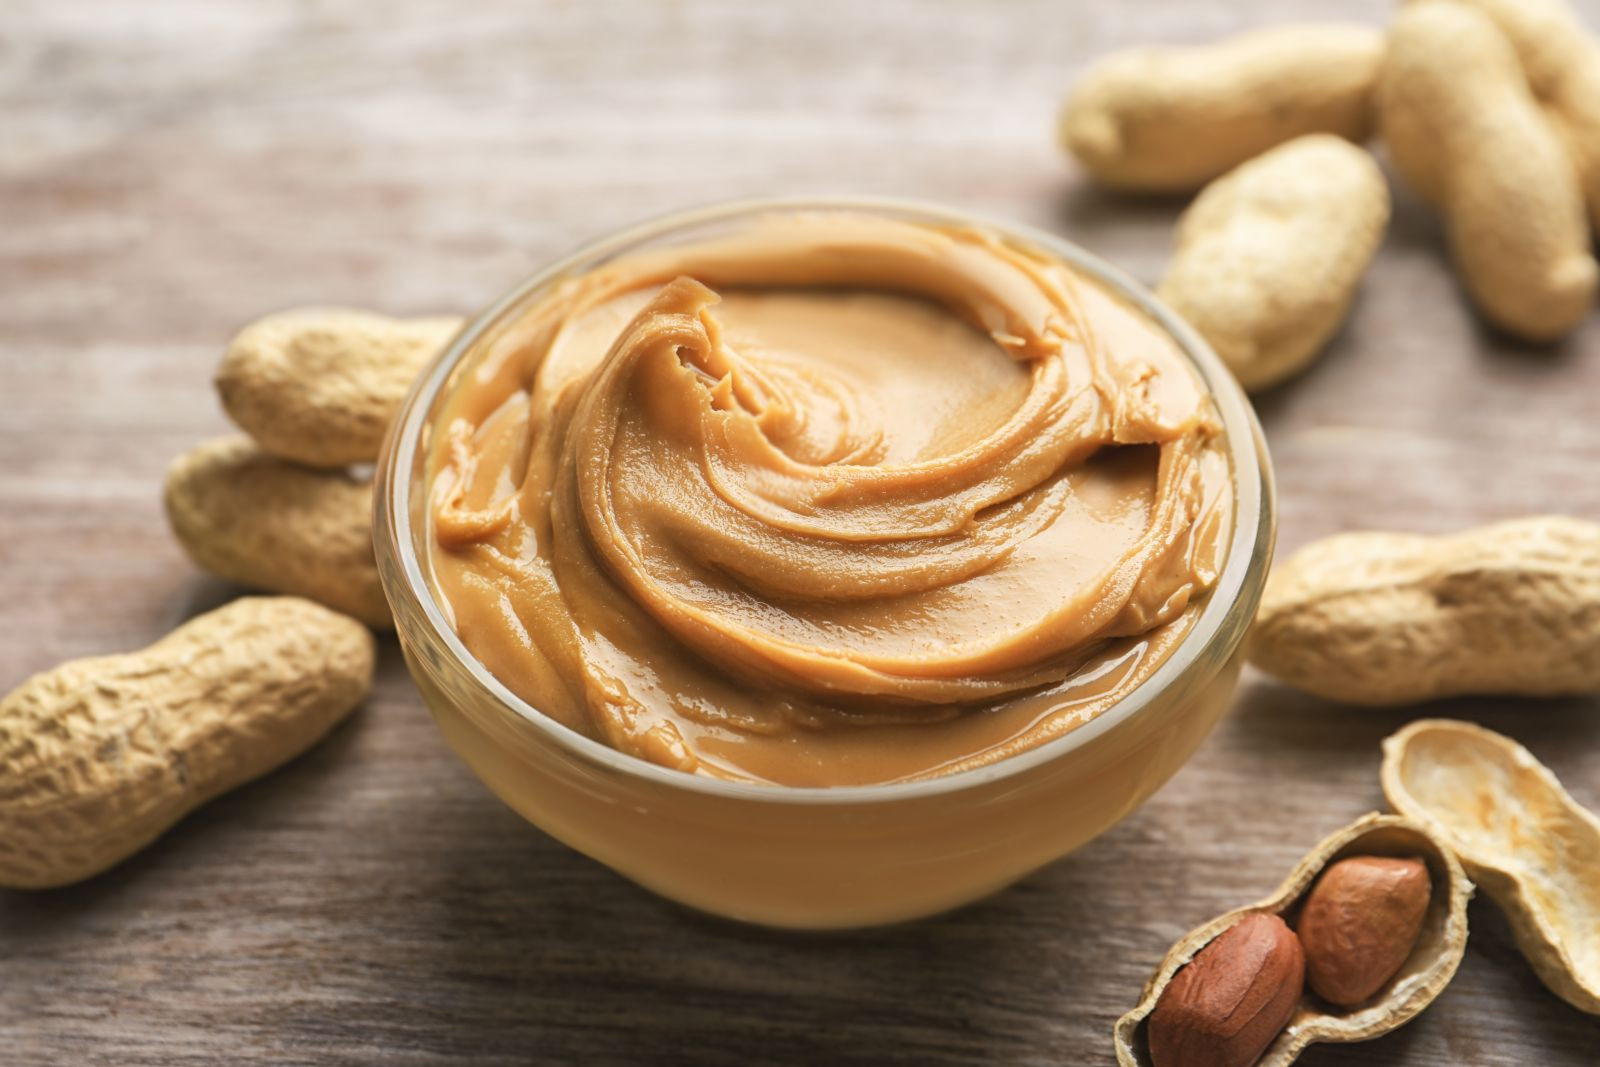 how long does it take to digest peanut butter